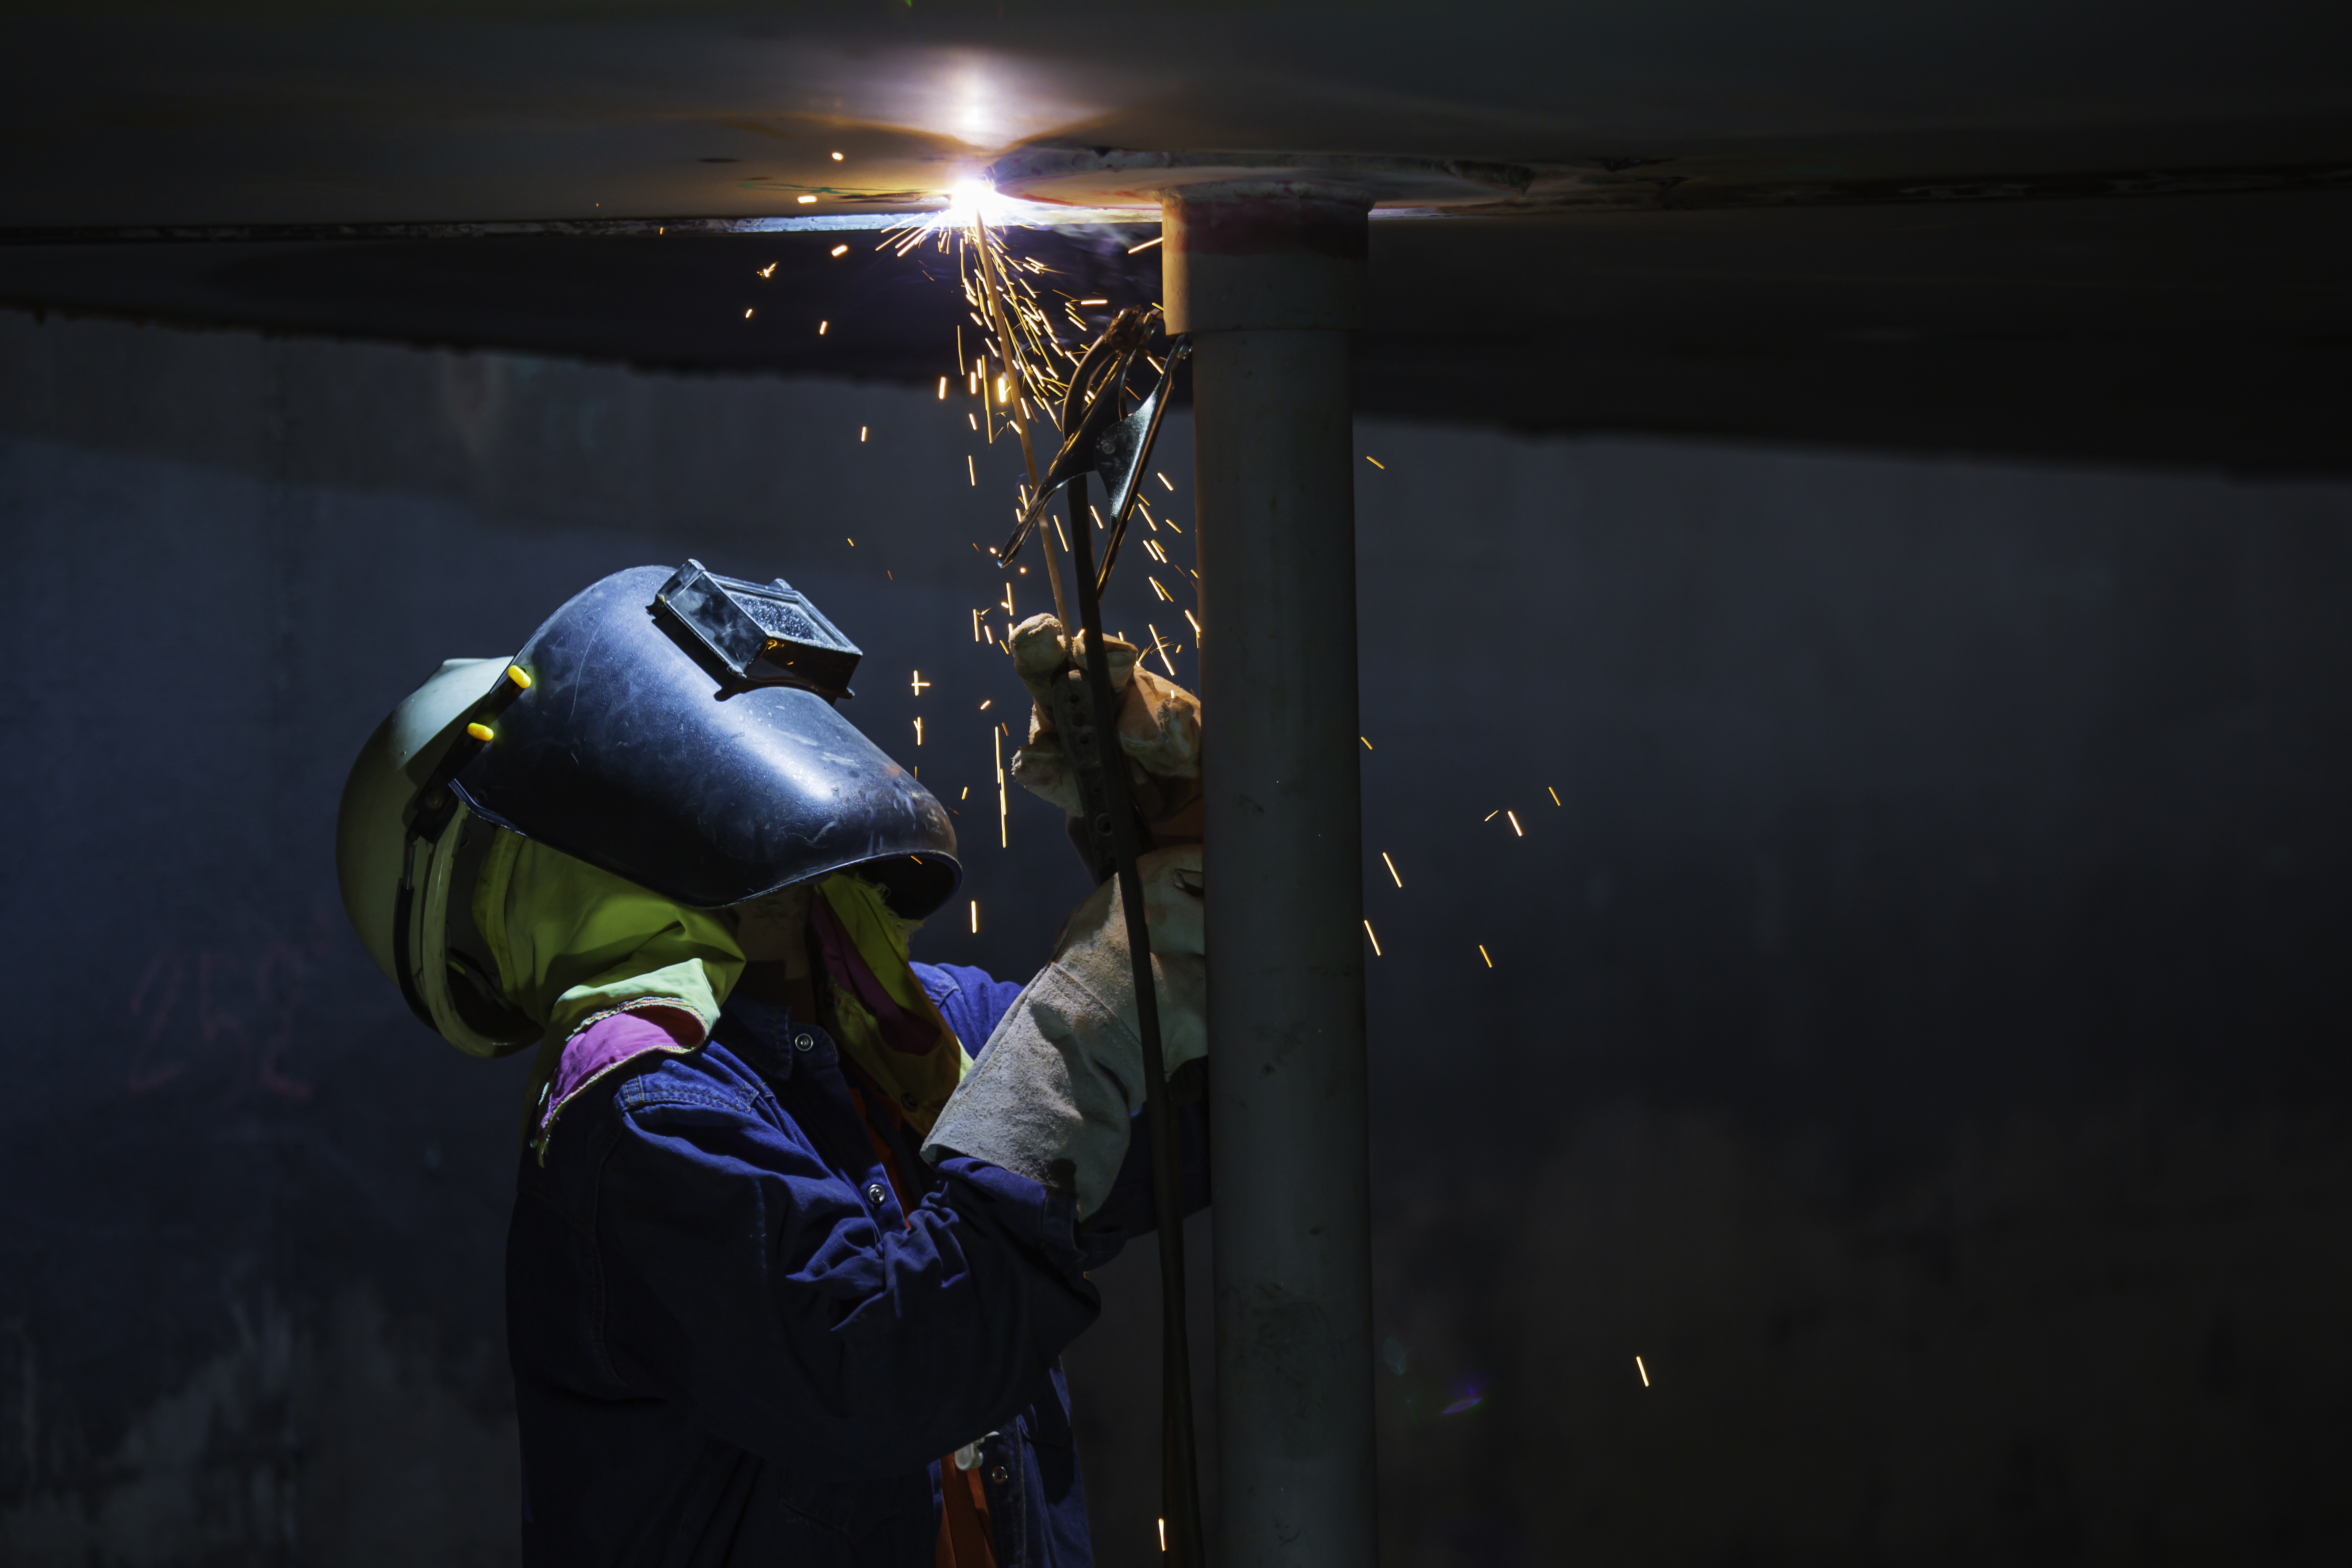 https://disprosol.es/resources/headers/welding-male-worker-metal-is-part-of-machinery-plate-roof-tank-beam-construction-flash-spark-inside-confined-spaces.jpg